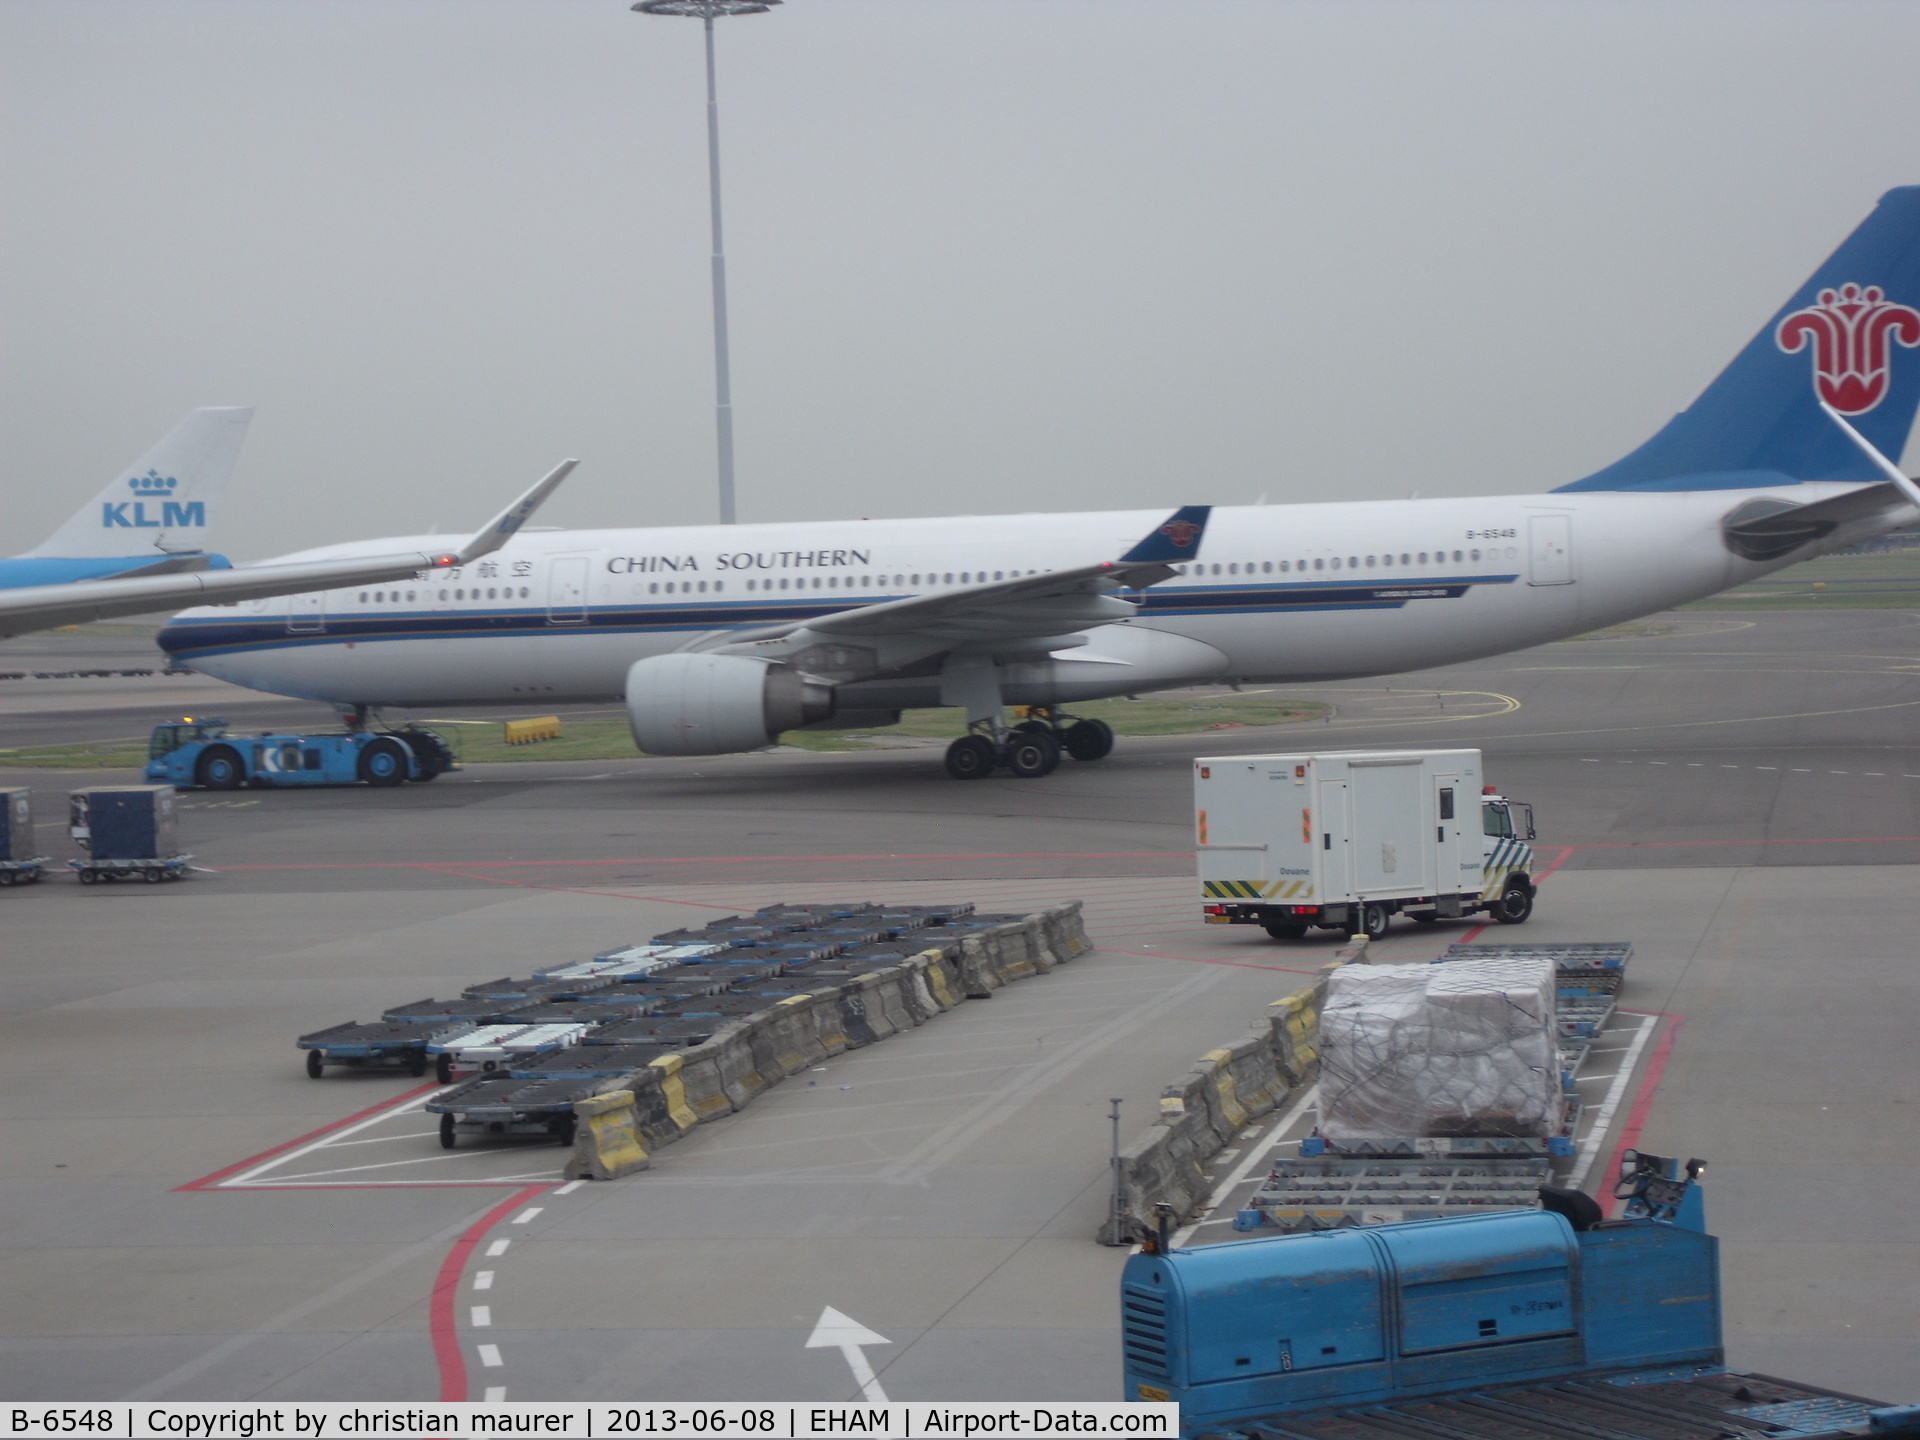 B-6548, 2012 Airbus A330-223 C/N 1335, CHINA SOUTHERN A330 BEING TUGED